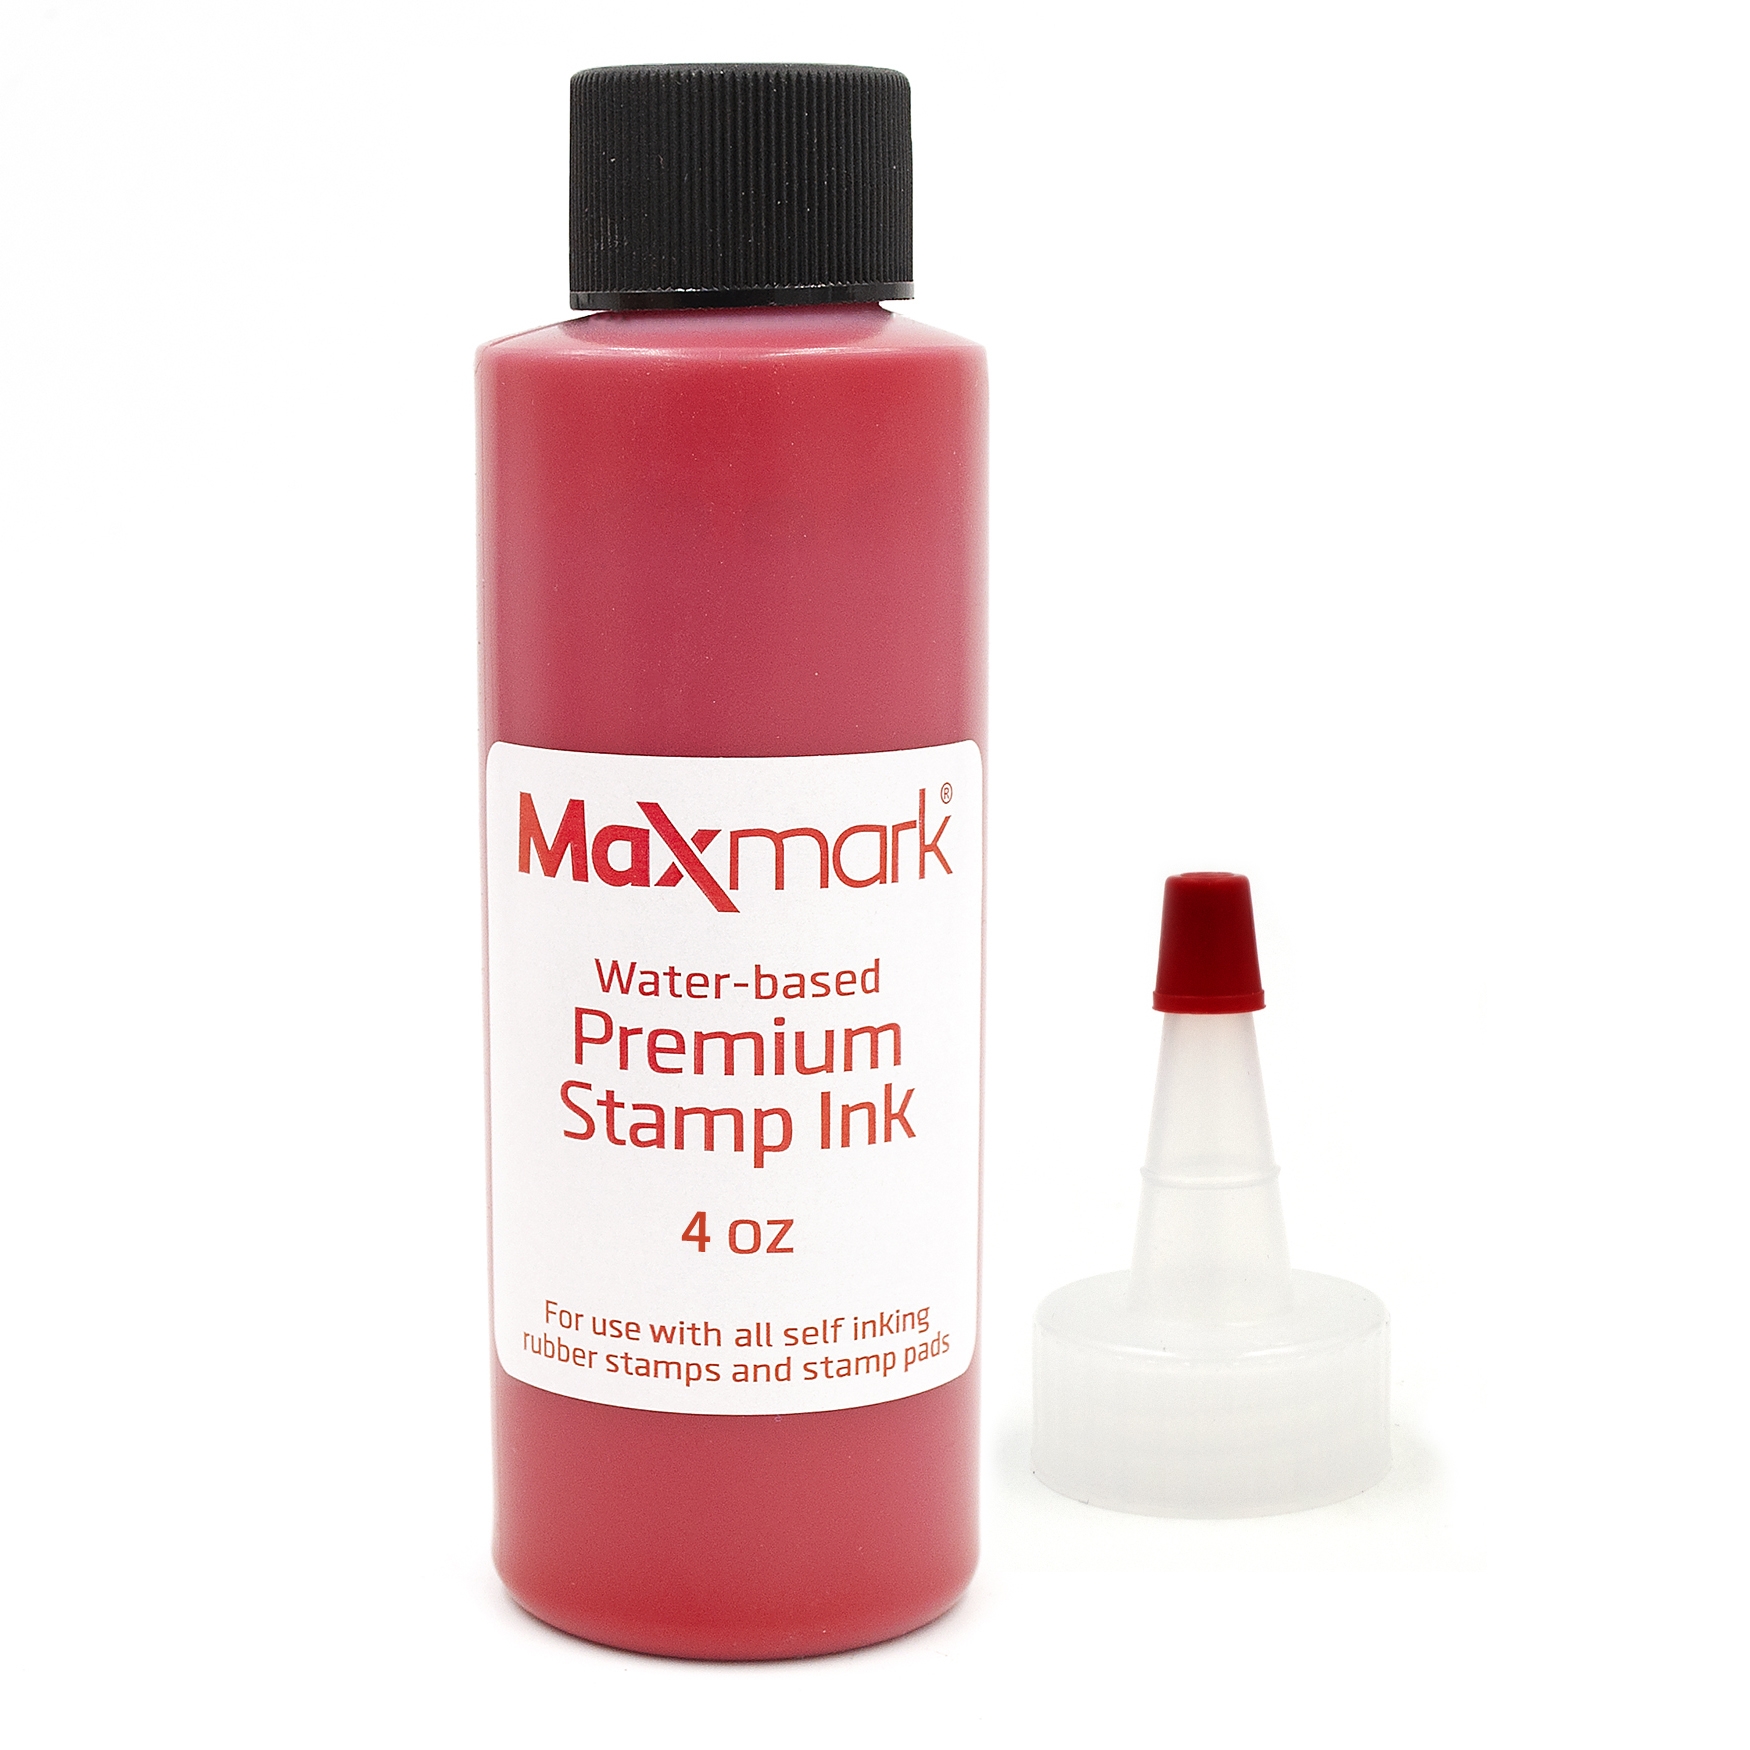 Premium Refill Ink for self Inking Stamps and Stamp Pads, Red Color - 4 oz.